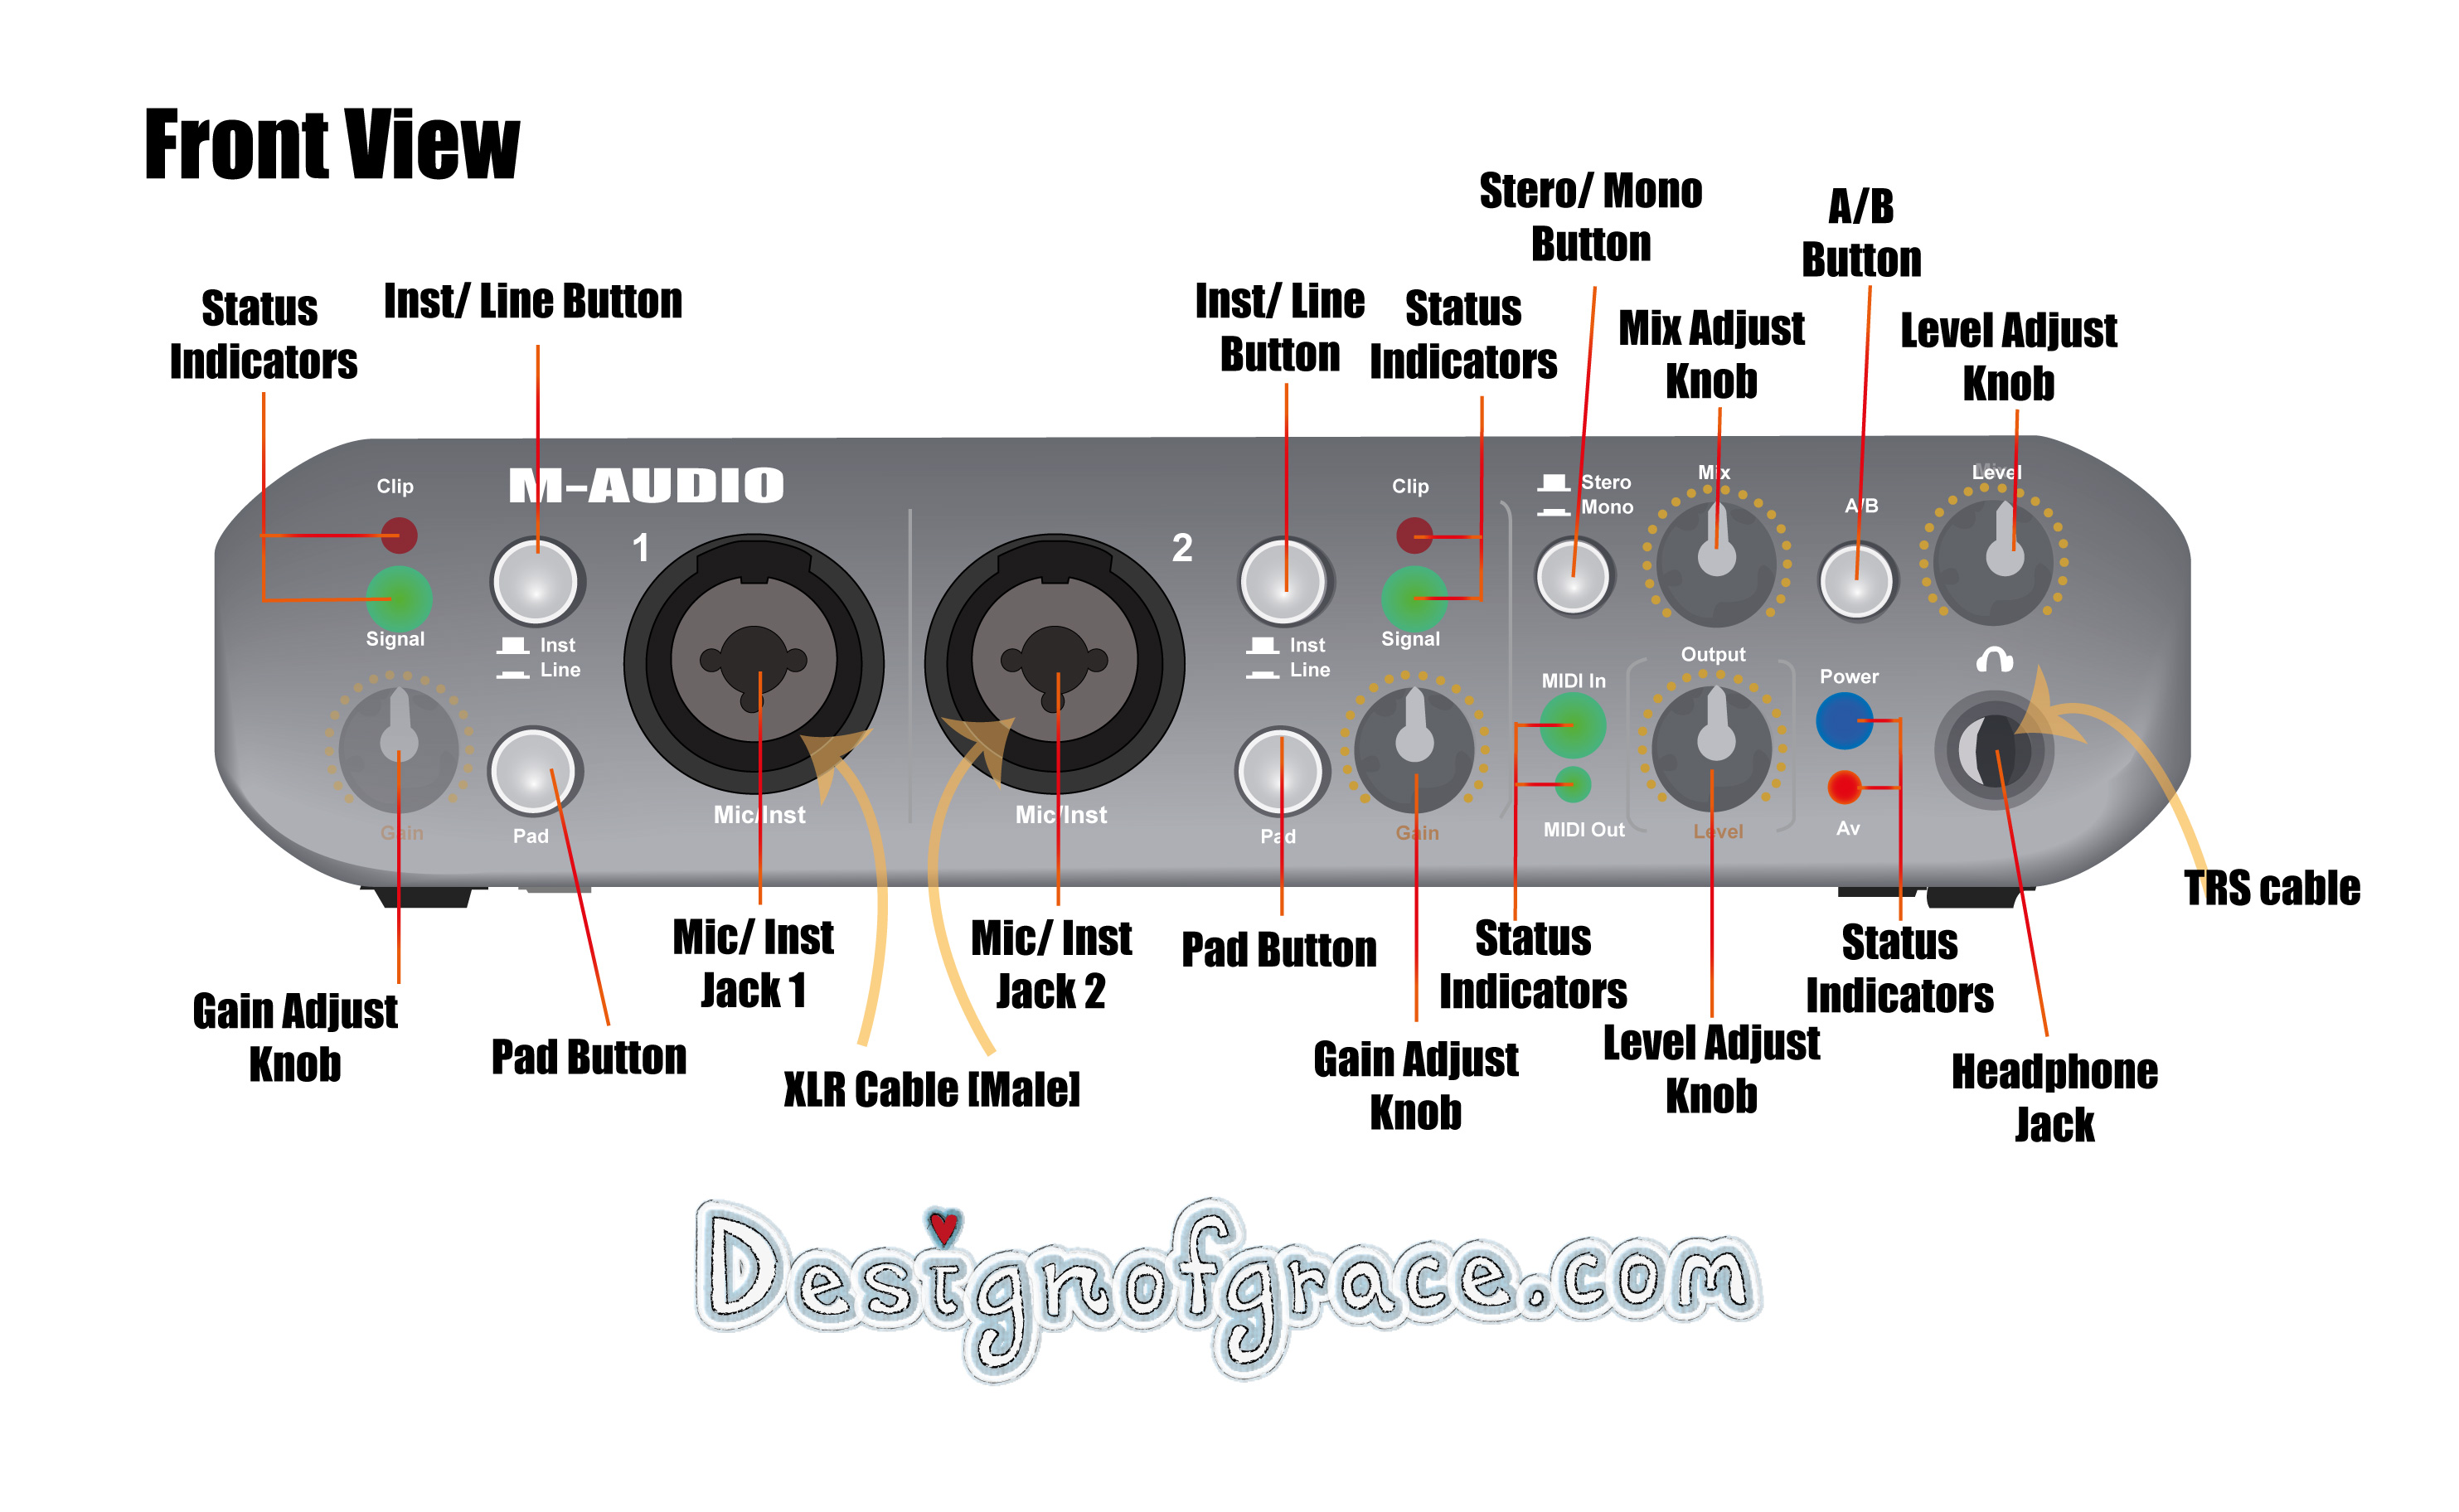 Illustration of a M-audio interface on the front for a home studio setup